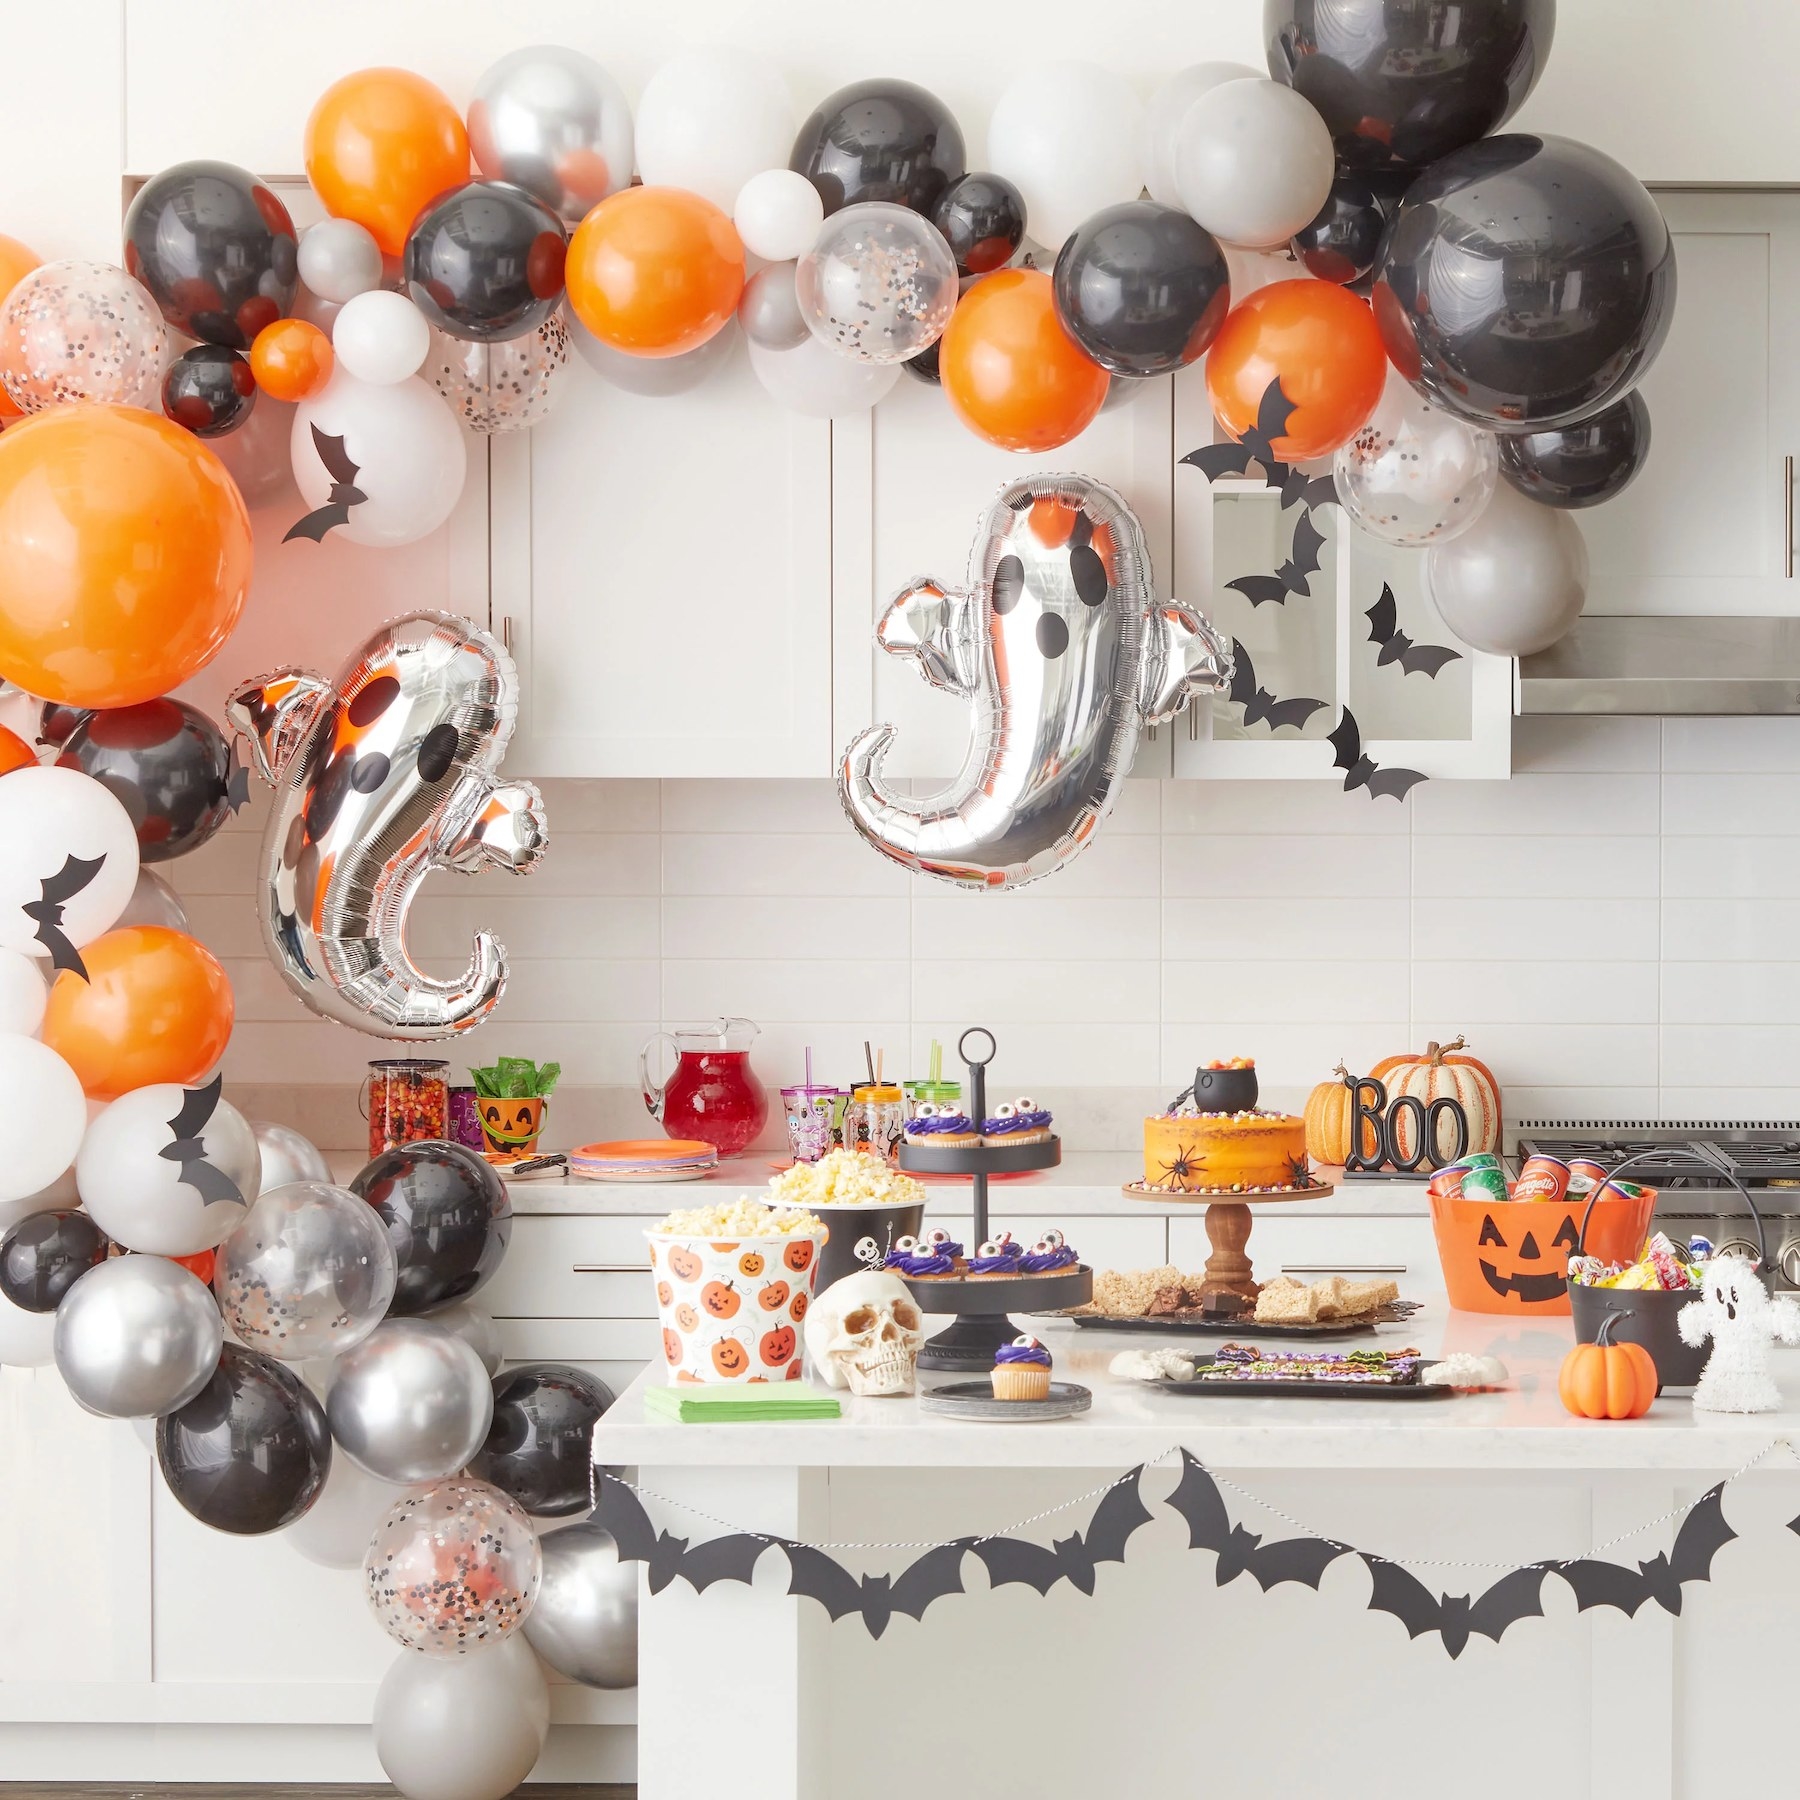 Balloon garland with other Halloween decorations